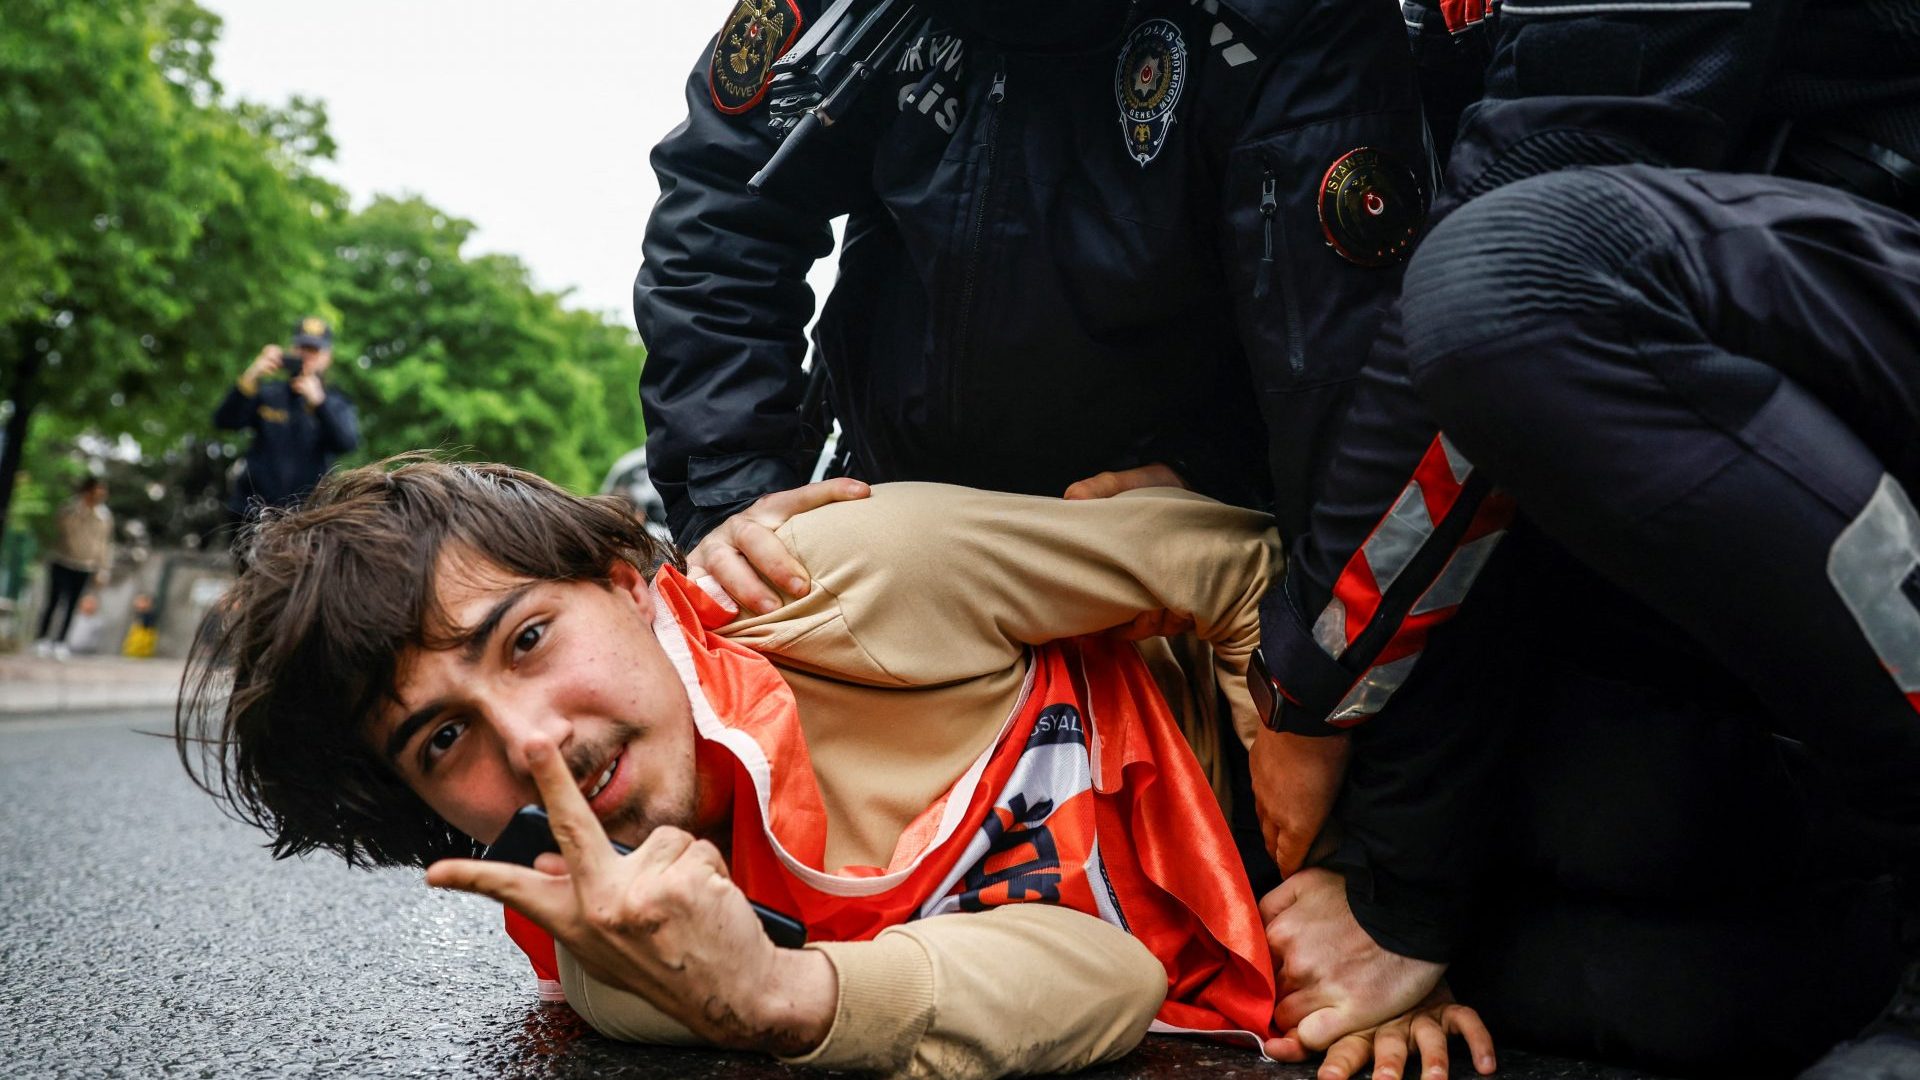 Turkish police detain a protester as he and others attempt to march to Taksim Square on May Day. Photo: Kemal Aslan/AFP/Getty